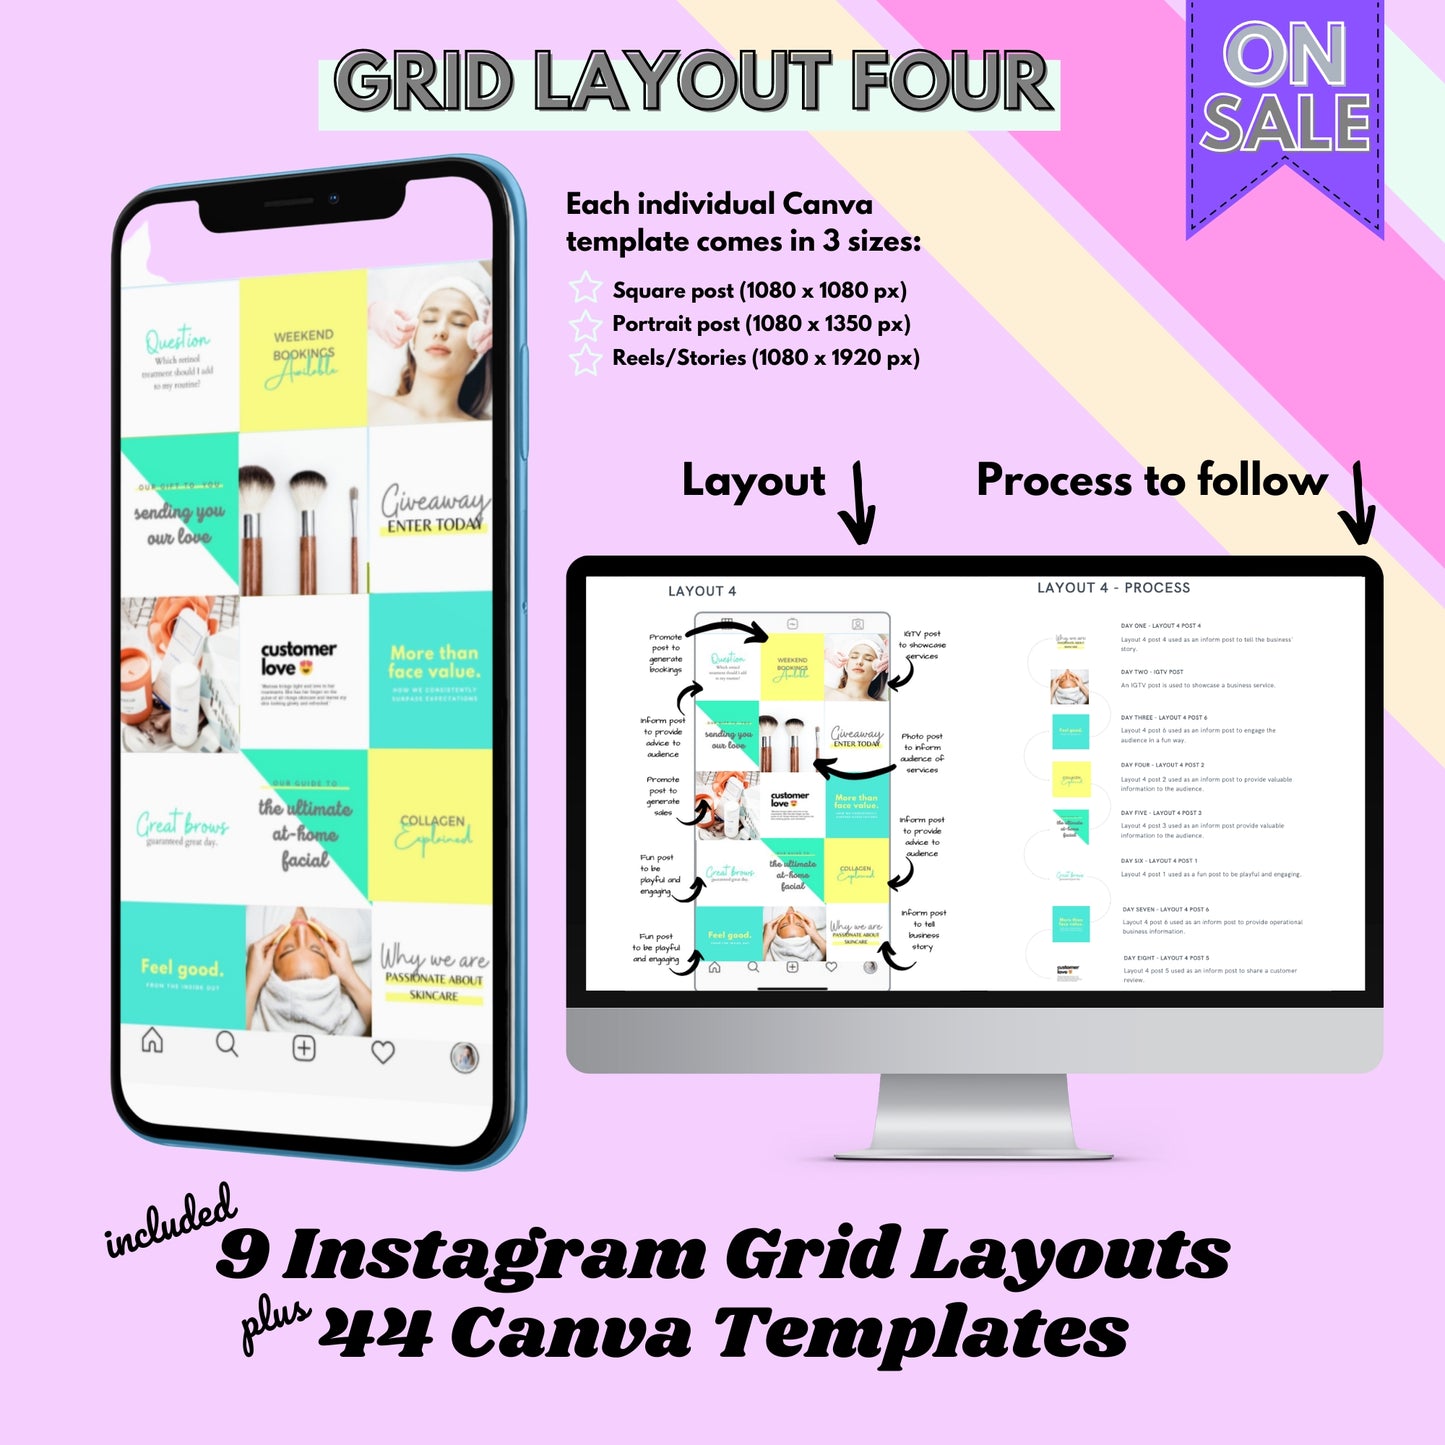 Instagram Grid Layout Guide - Instant download